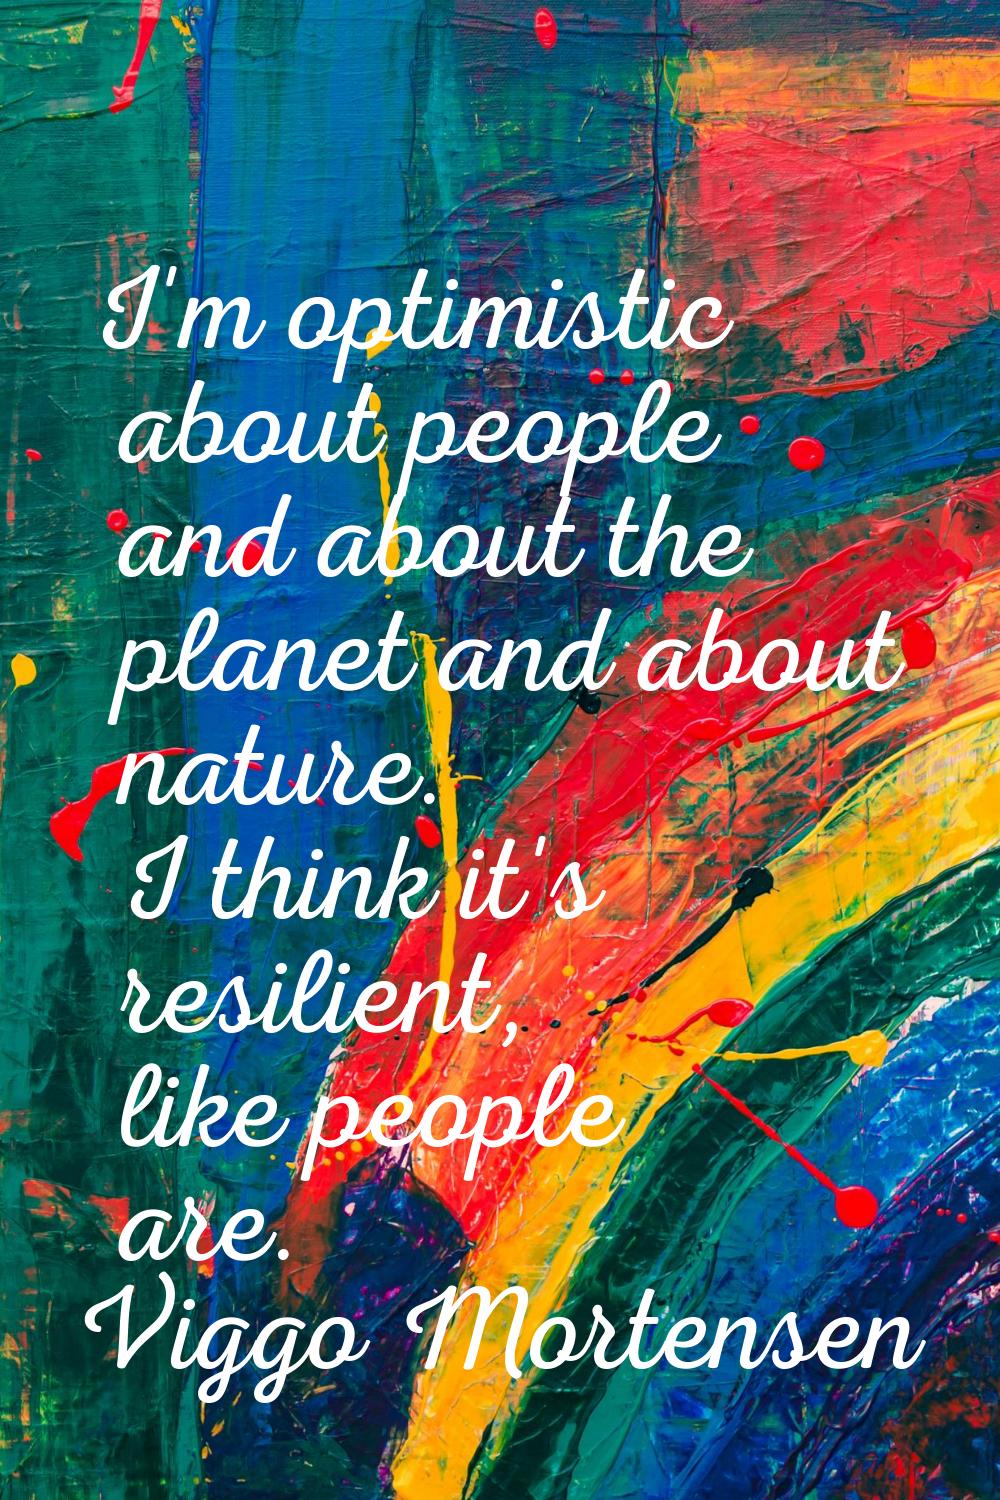 I'm optimistic about people and about the planet and about nature. I think it's resilient, like peo